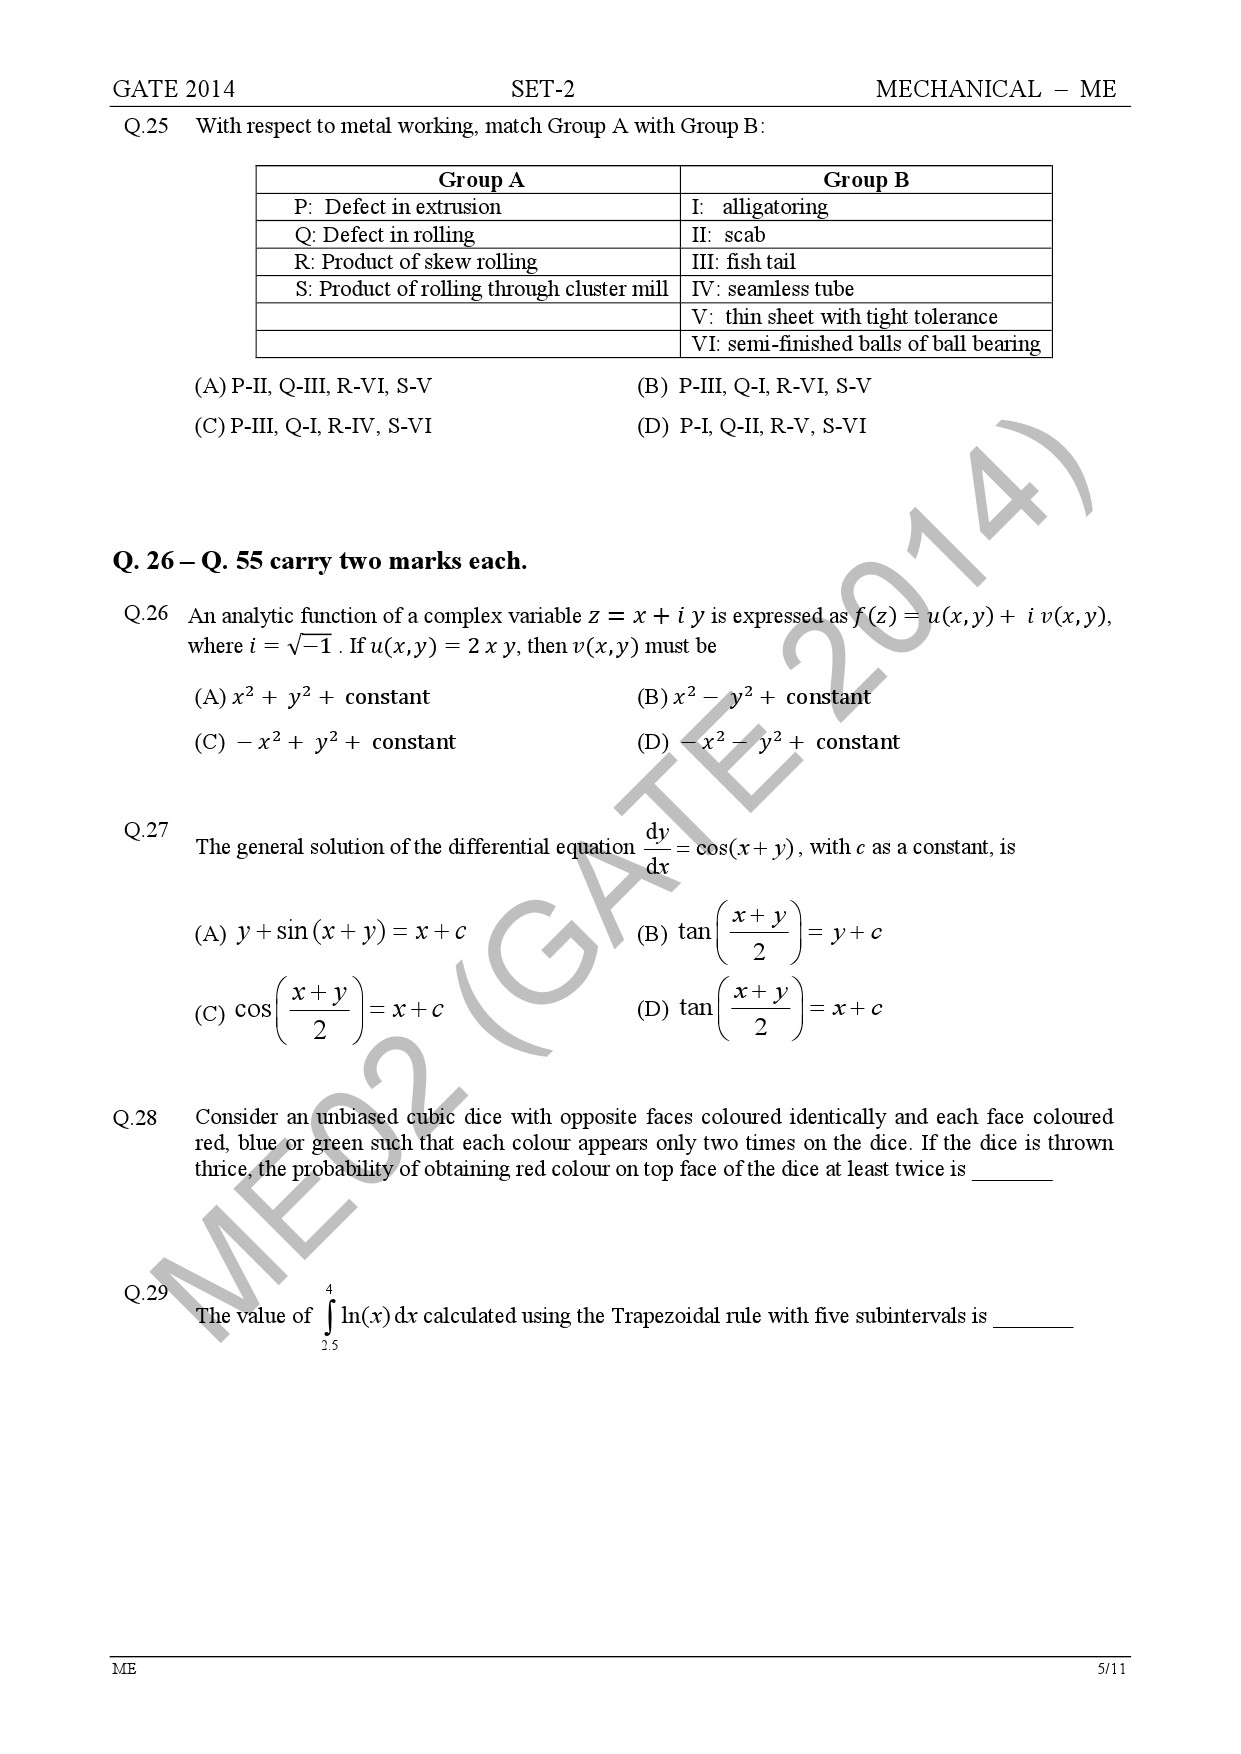 GATE Exam Question Paper 2014 Mechanical Engineering Set 2 11